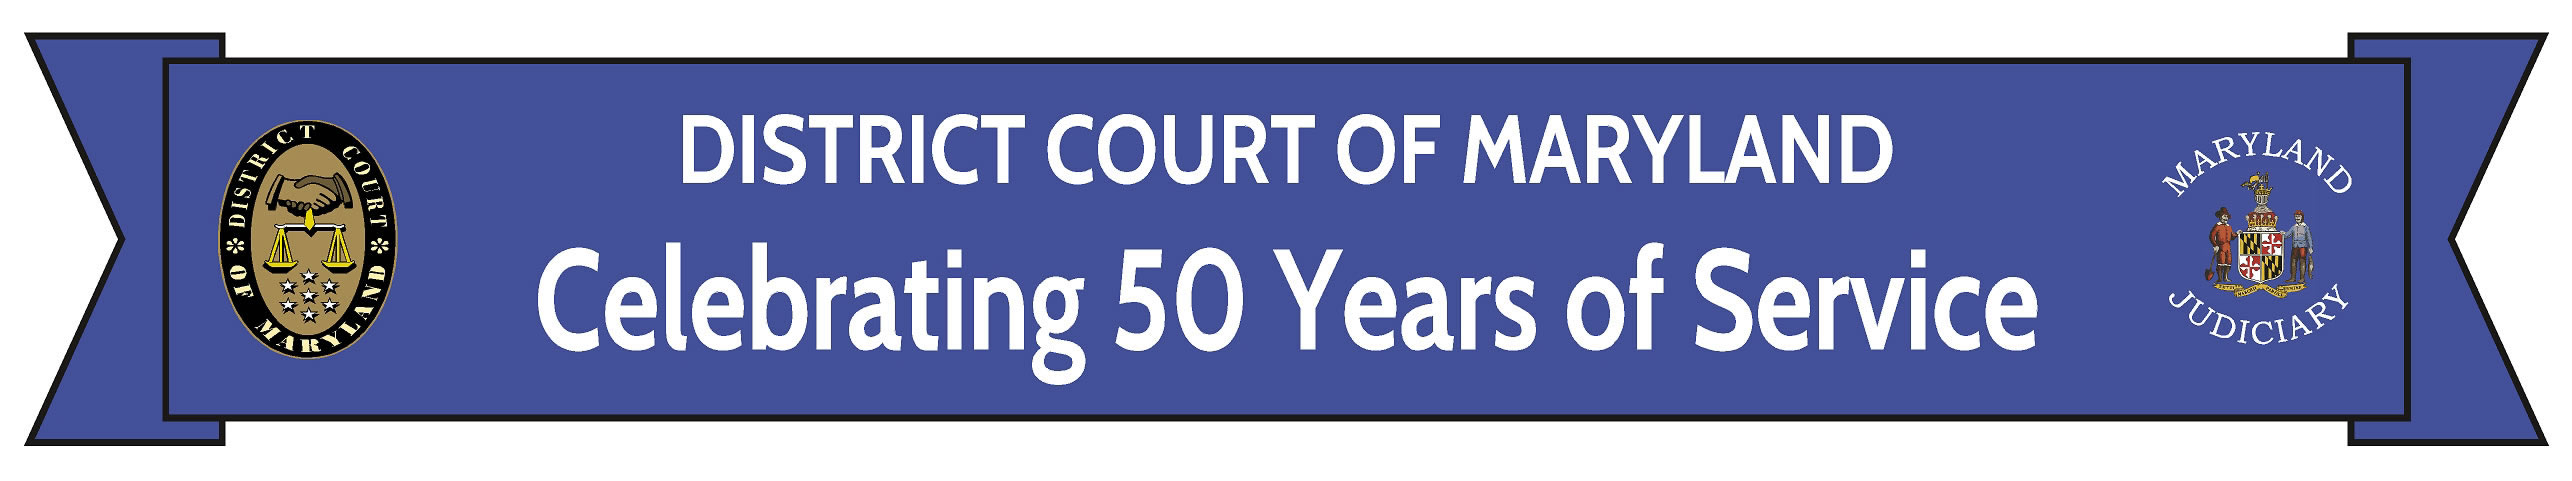 Maryland District Court 50th Year Anniversary banner